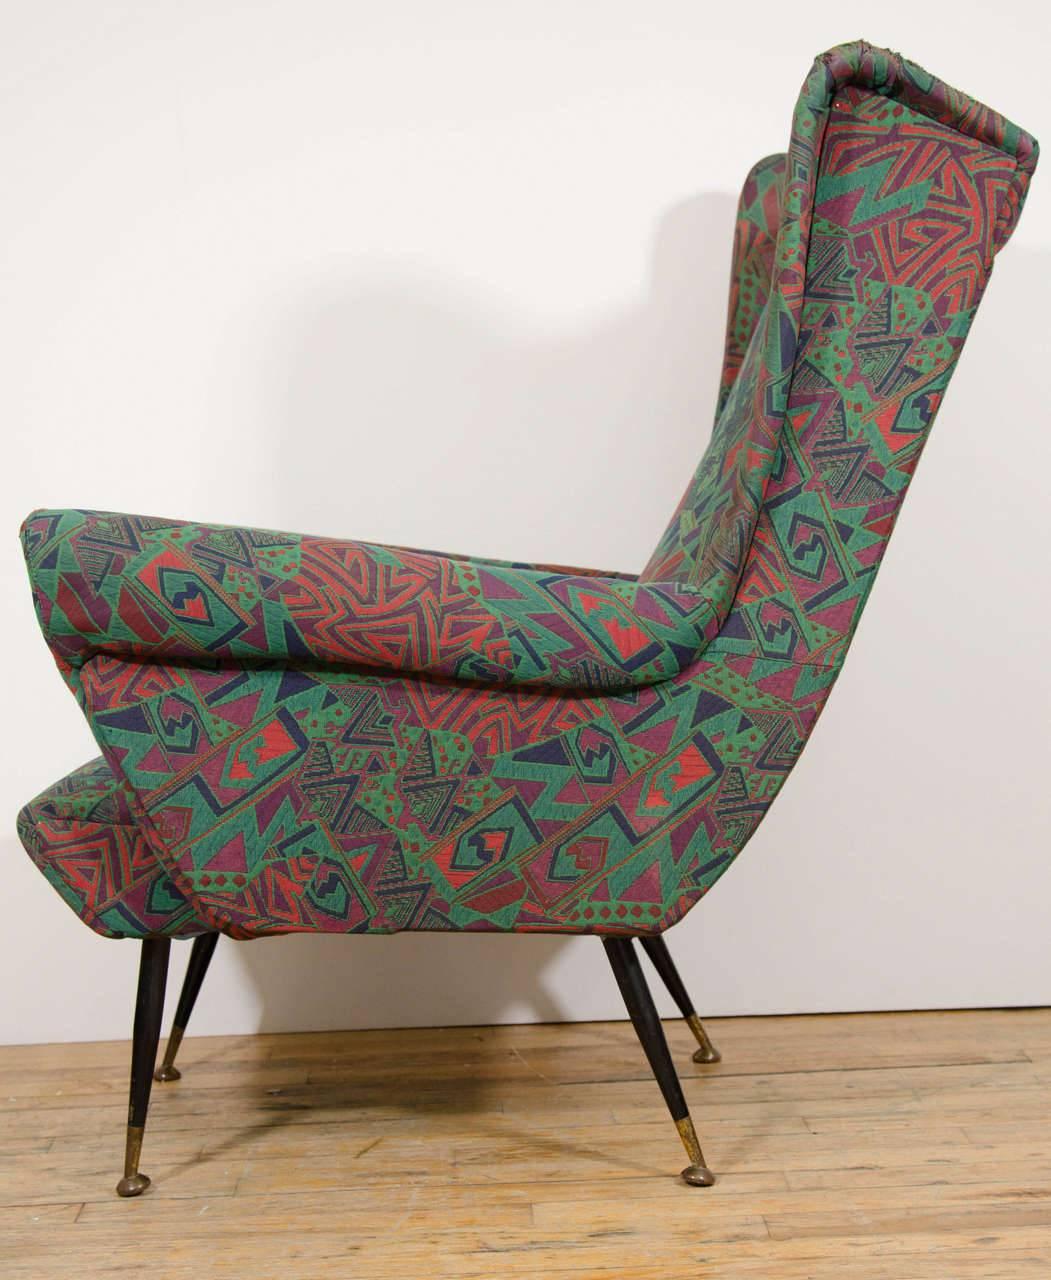 A wonderful pair of Italian wingback armchairs or lounge chairs upholstered in original aqua fabric with colorful, abstract design, circa 1950.